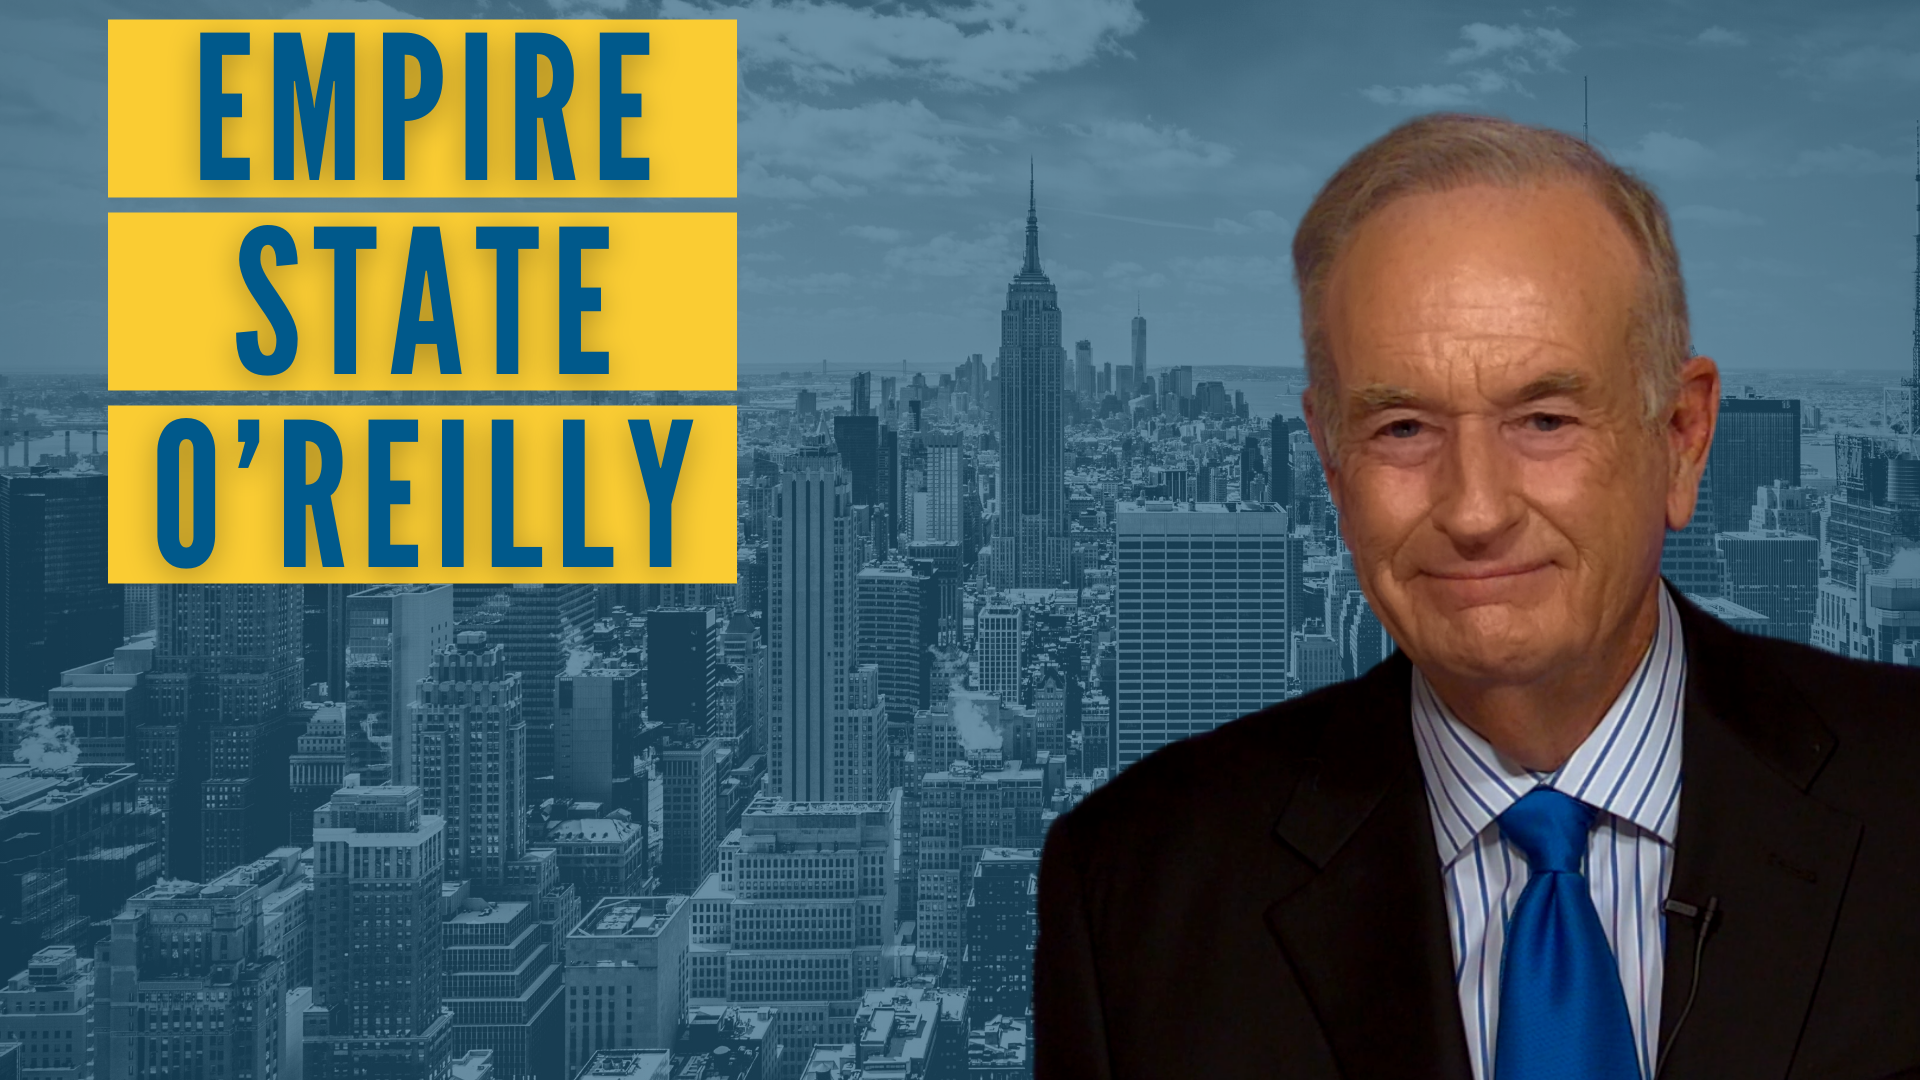 Empire State O'Reilly: Enabling Evil